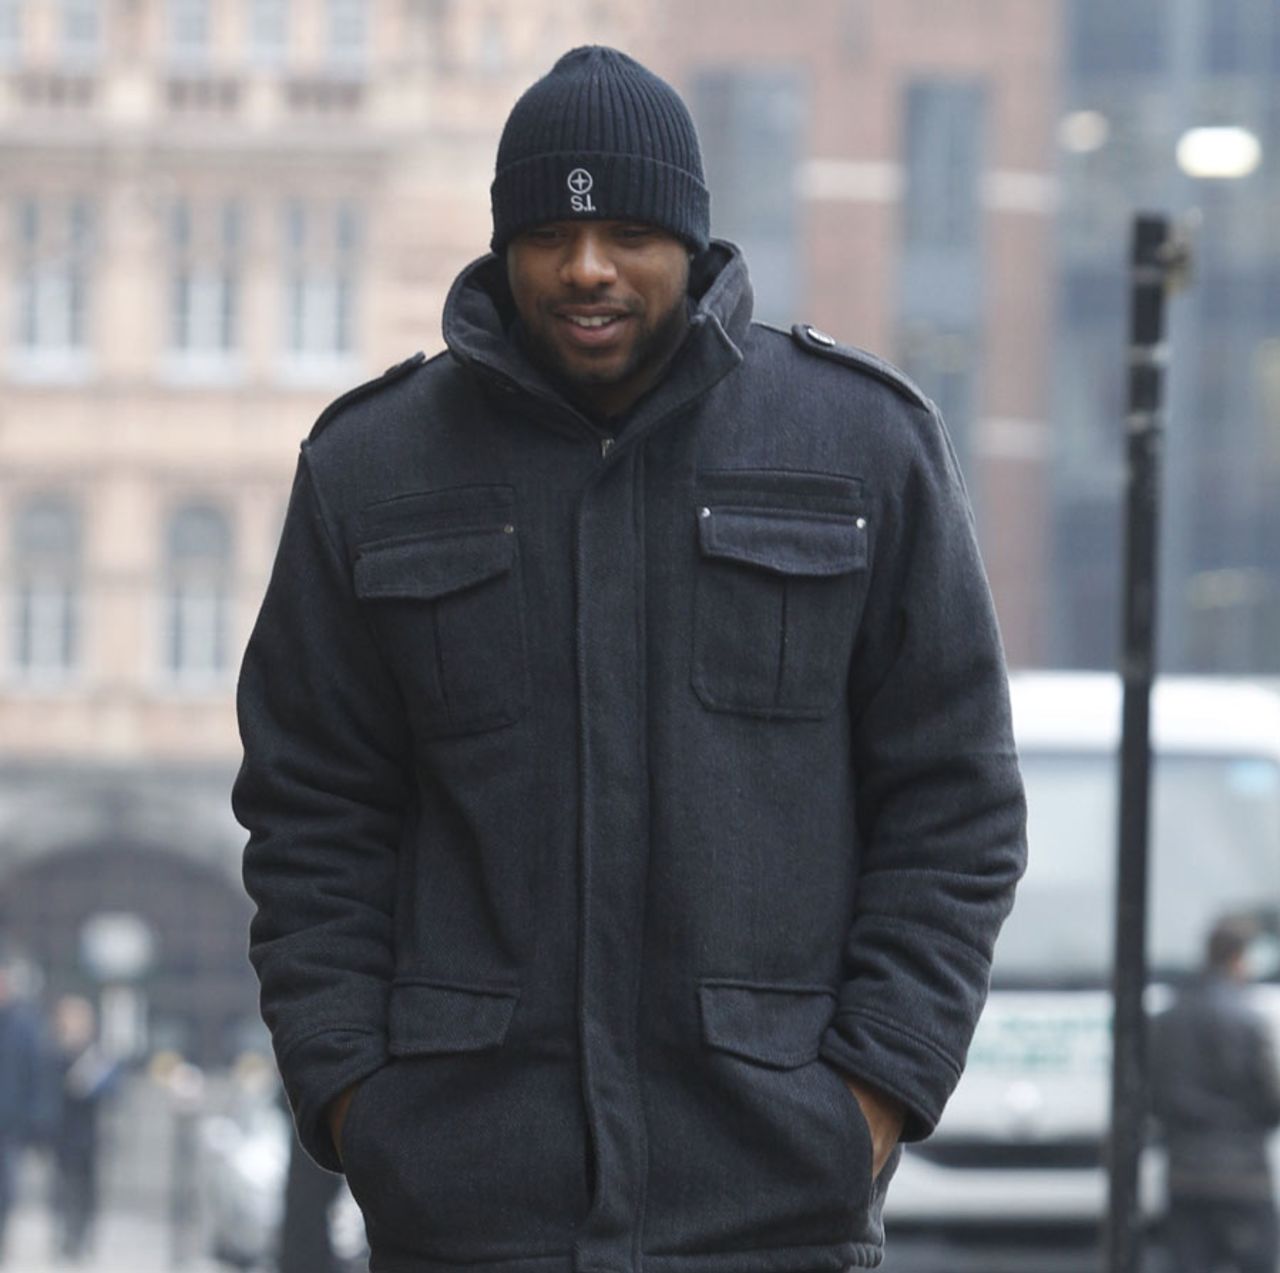 Former Essex cricket Mervyn Westfield arrives for his sentencing at Old Bailey court, London, February 10, 2012